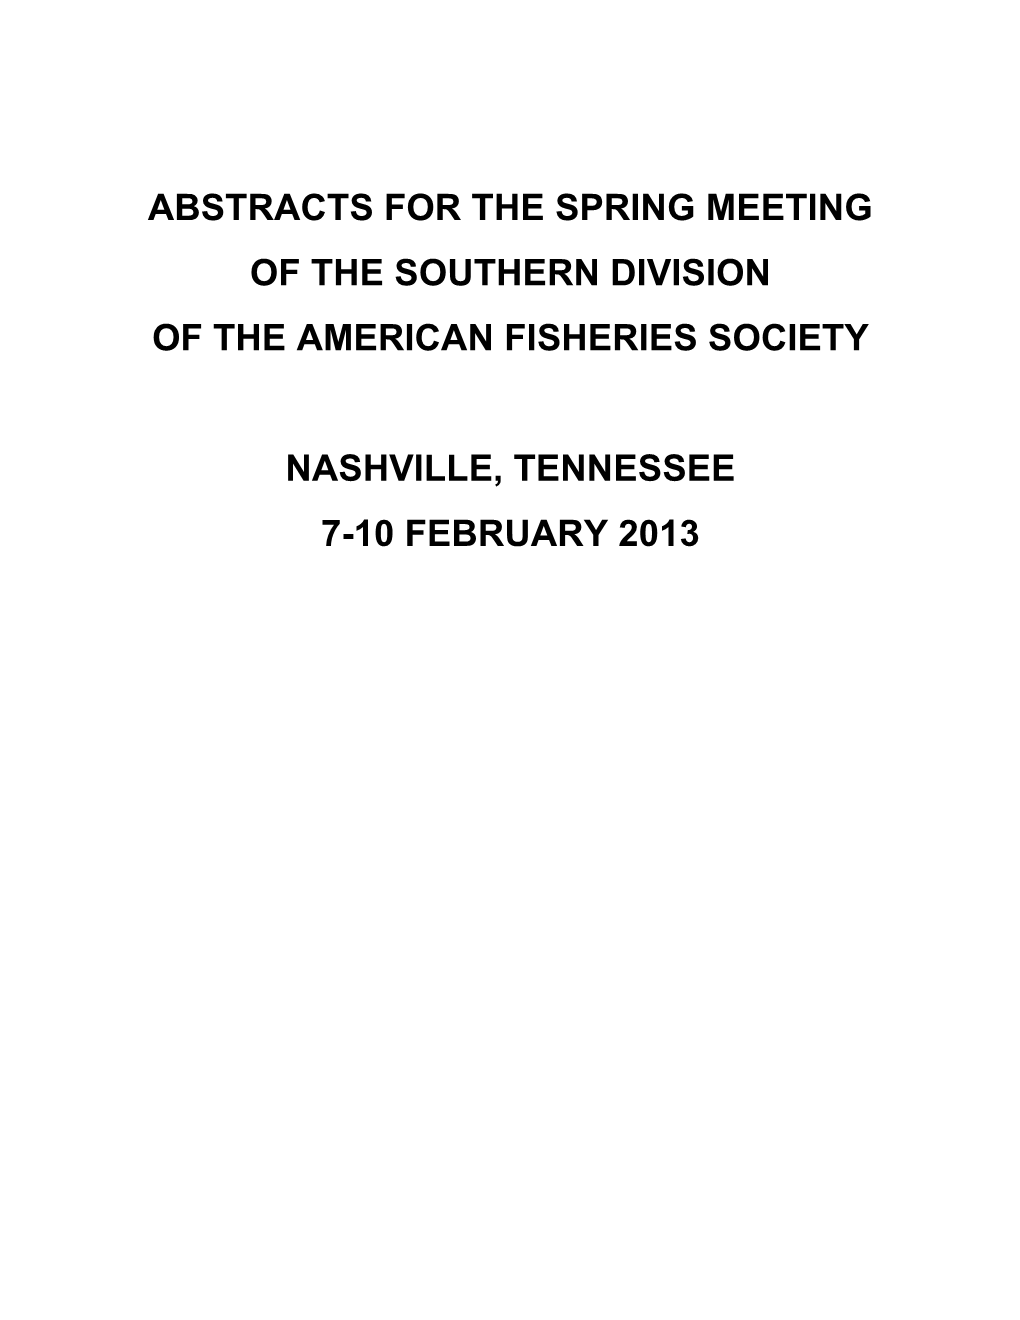 2013 Southern Division Spring Meeting, Nashville, Tennessee